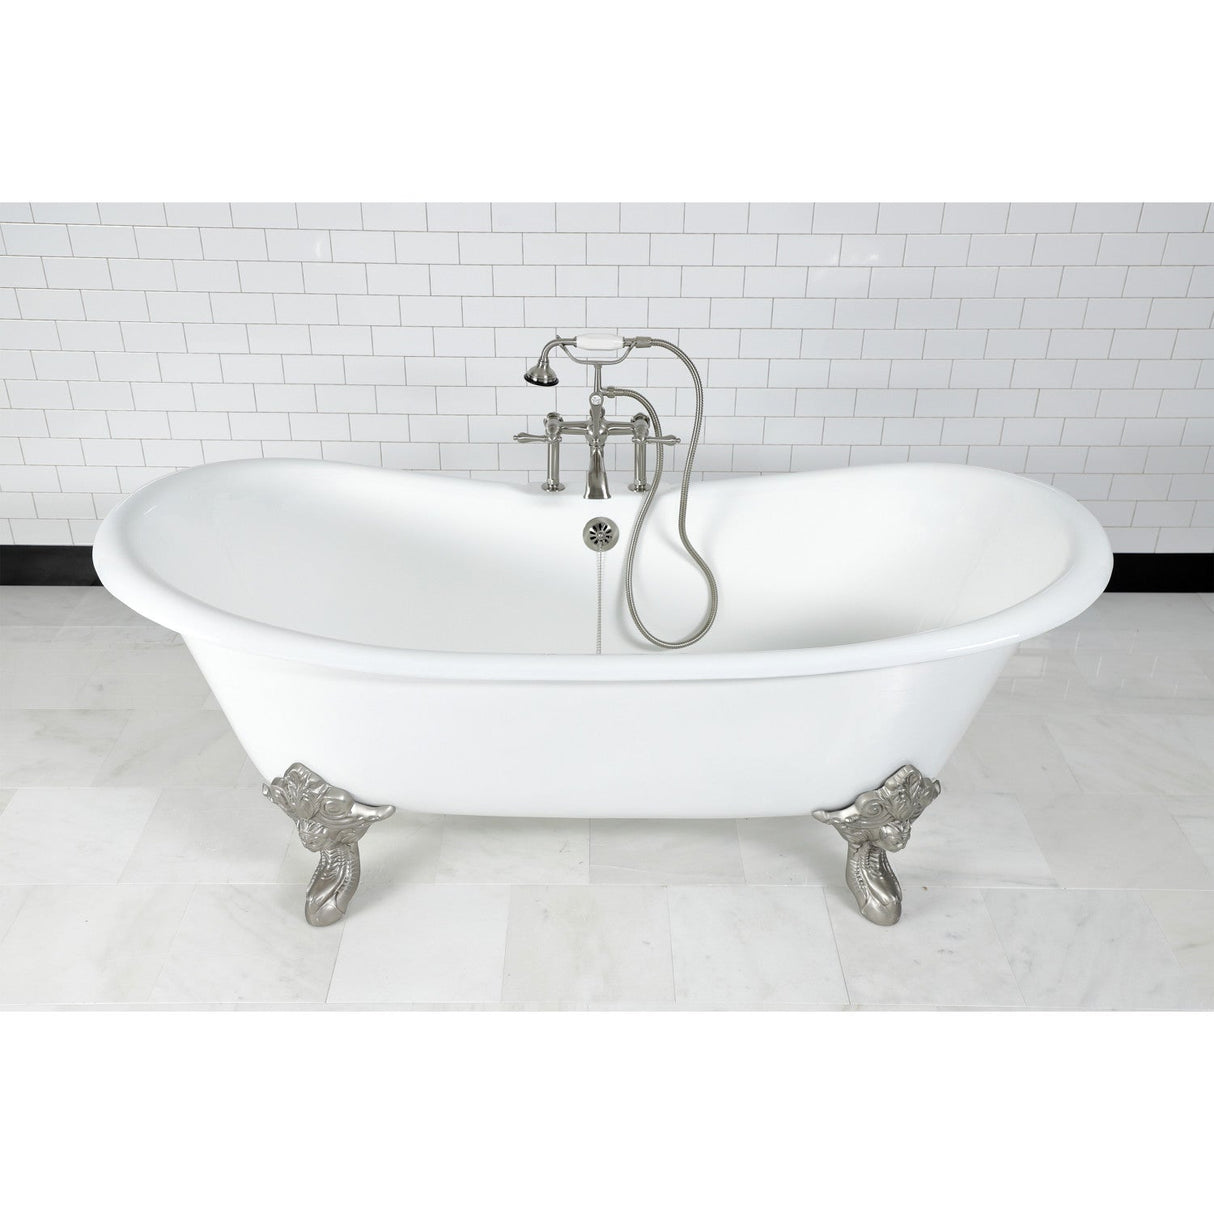 Aqua Eden VCT7DS7231NL8 72-Inch Cast Iron Double Slipper Clawfoot Tub with 7-Inch Faucet Drillings, White/Brushed Nickel